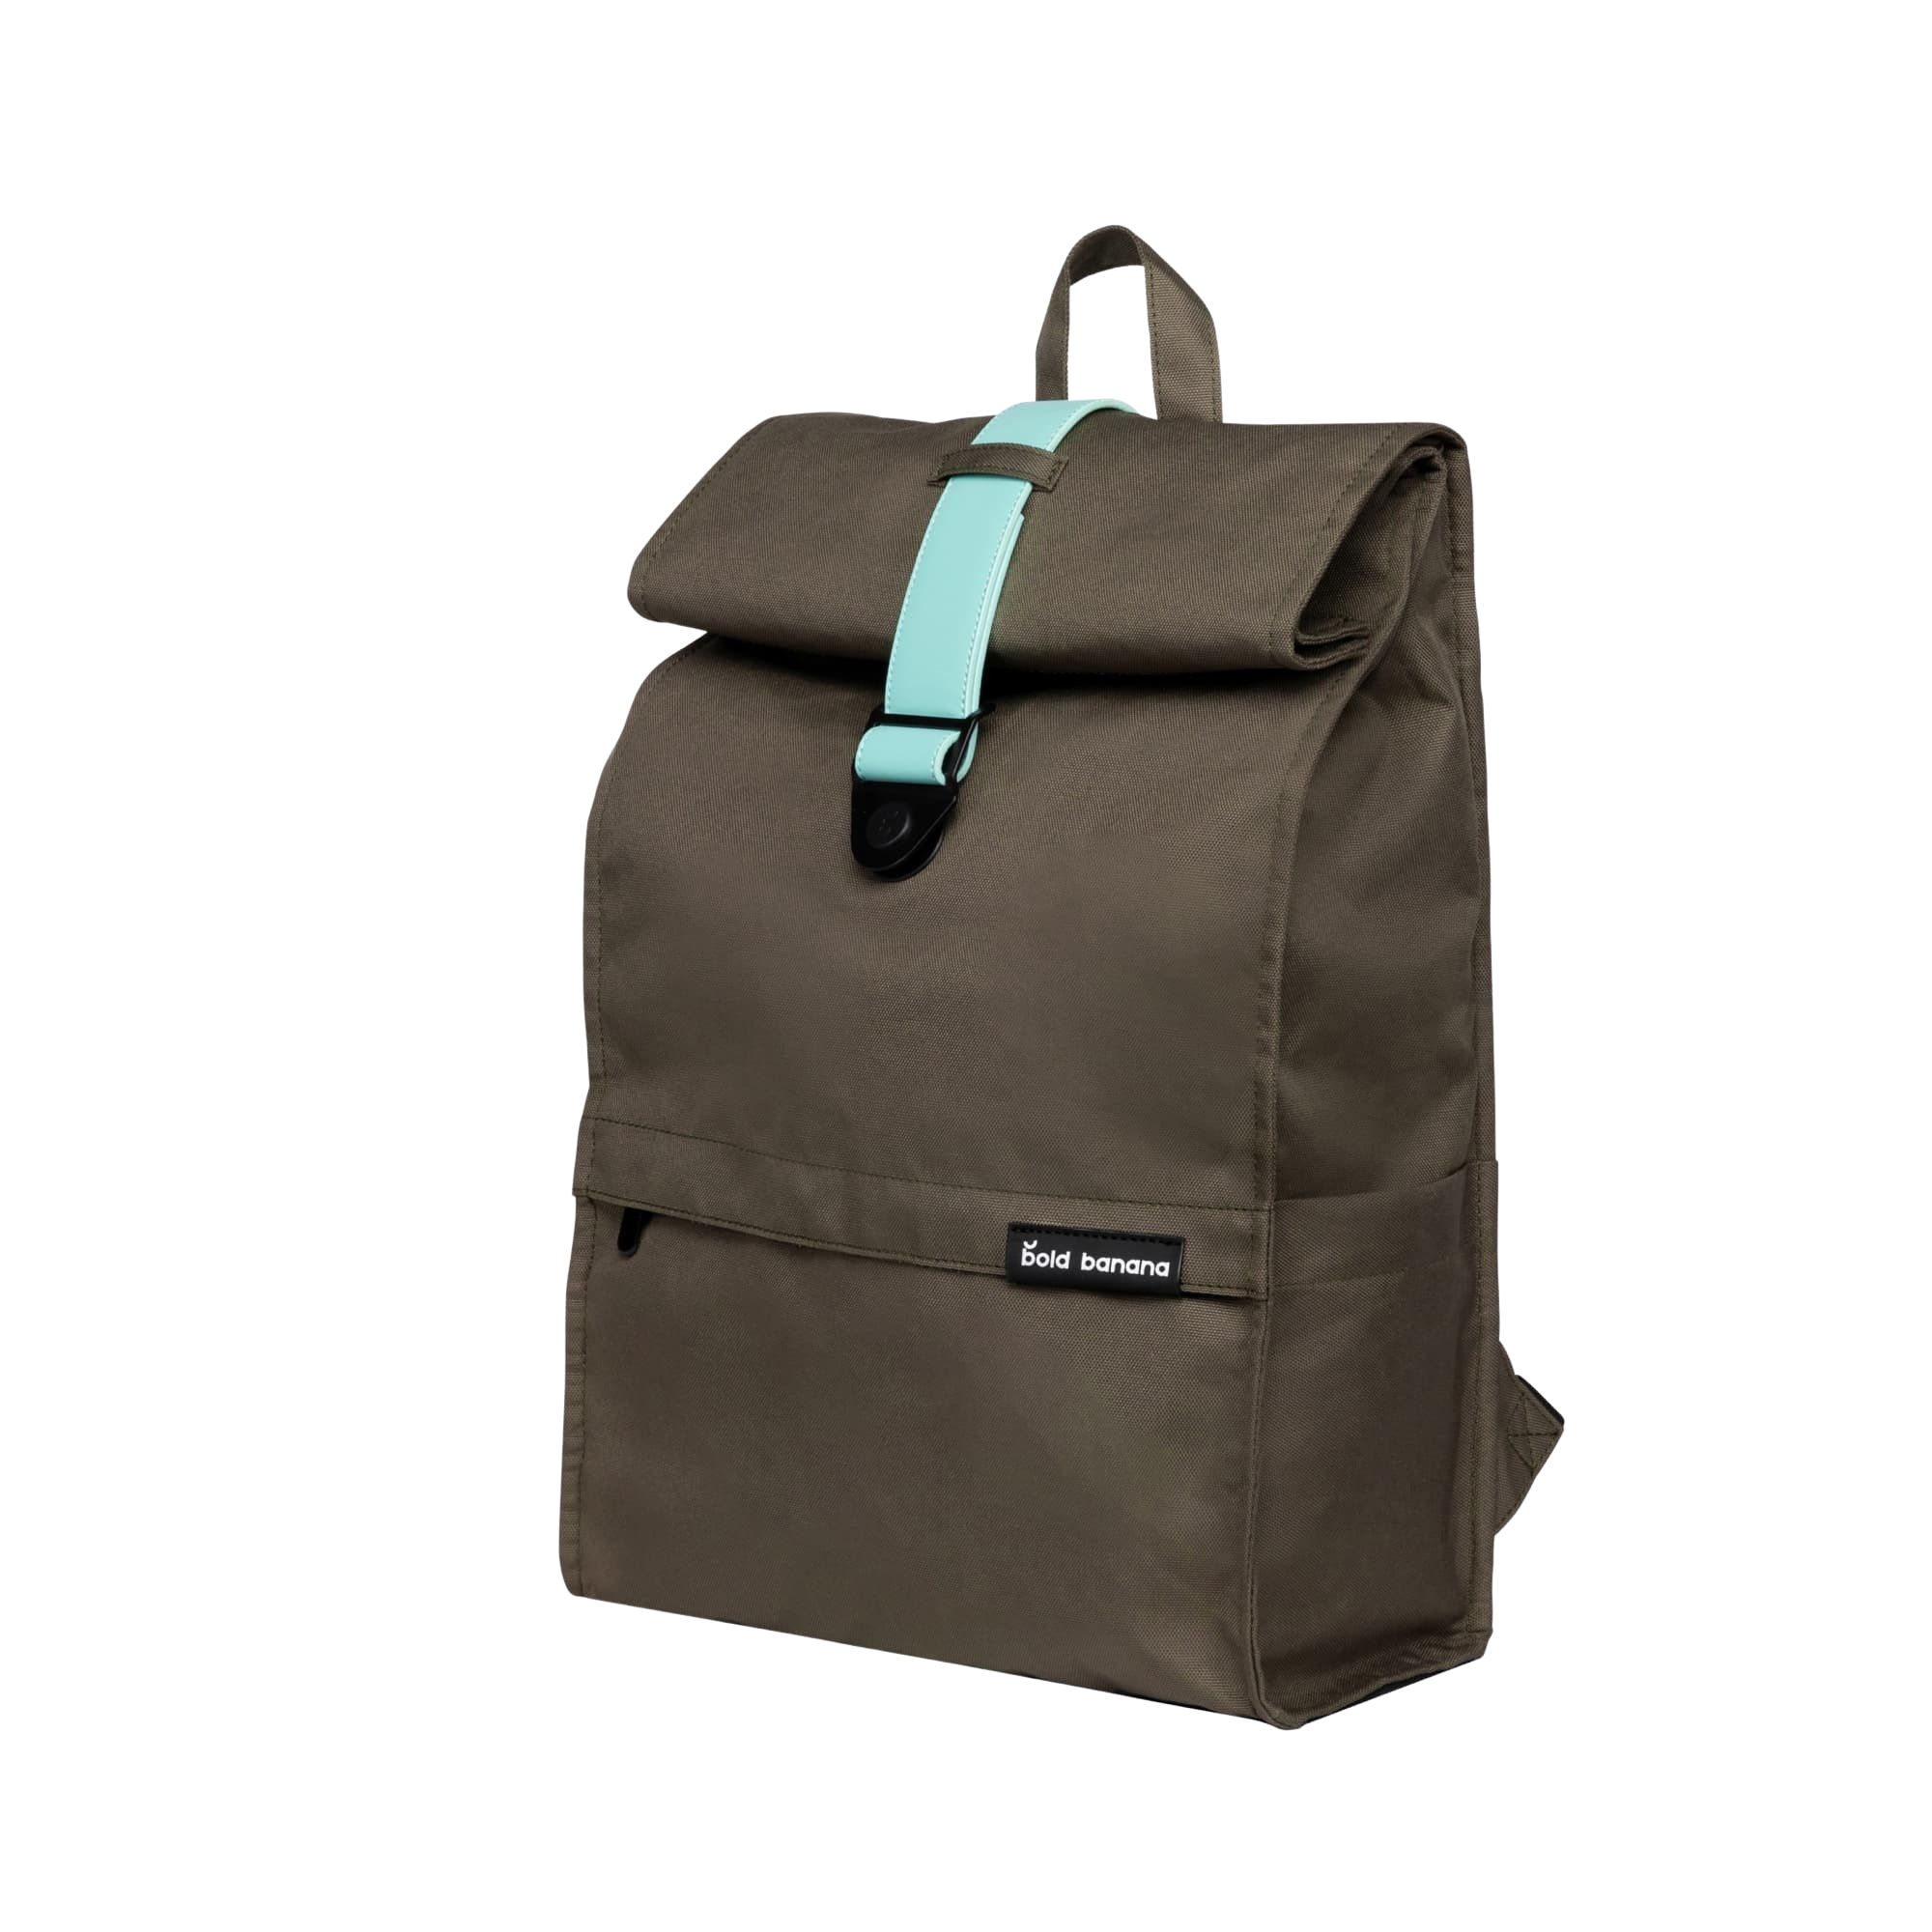 2. Bold Banana Rolltop Laptop Backpack – Green cosmo